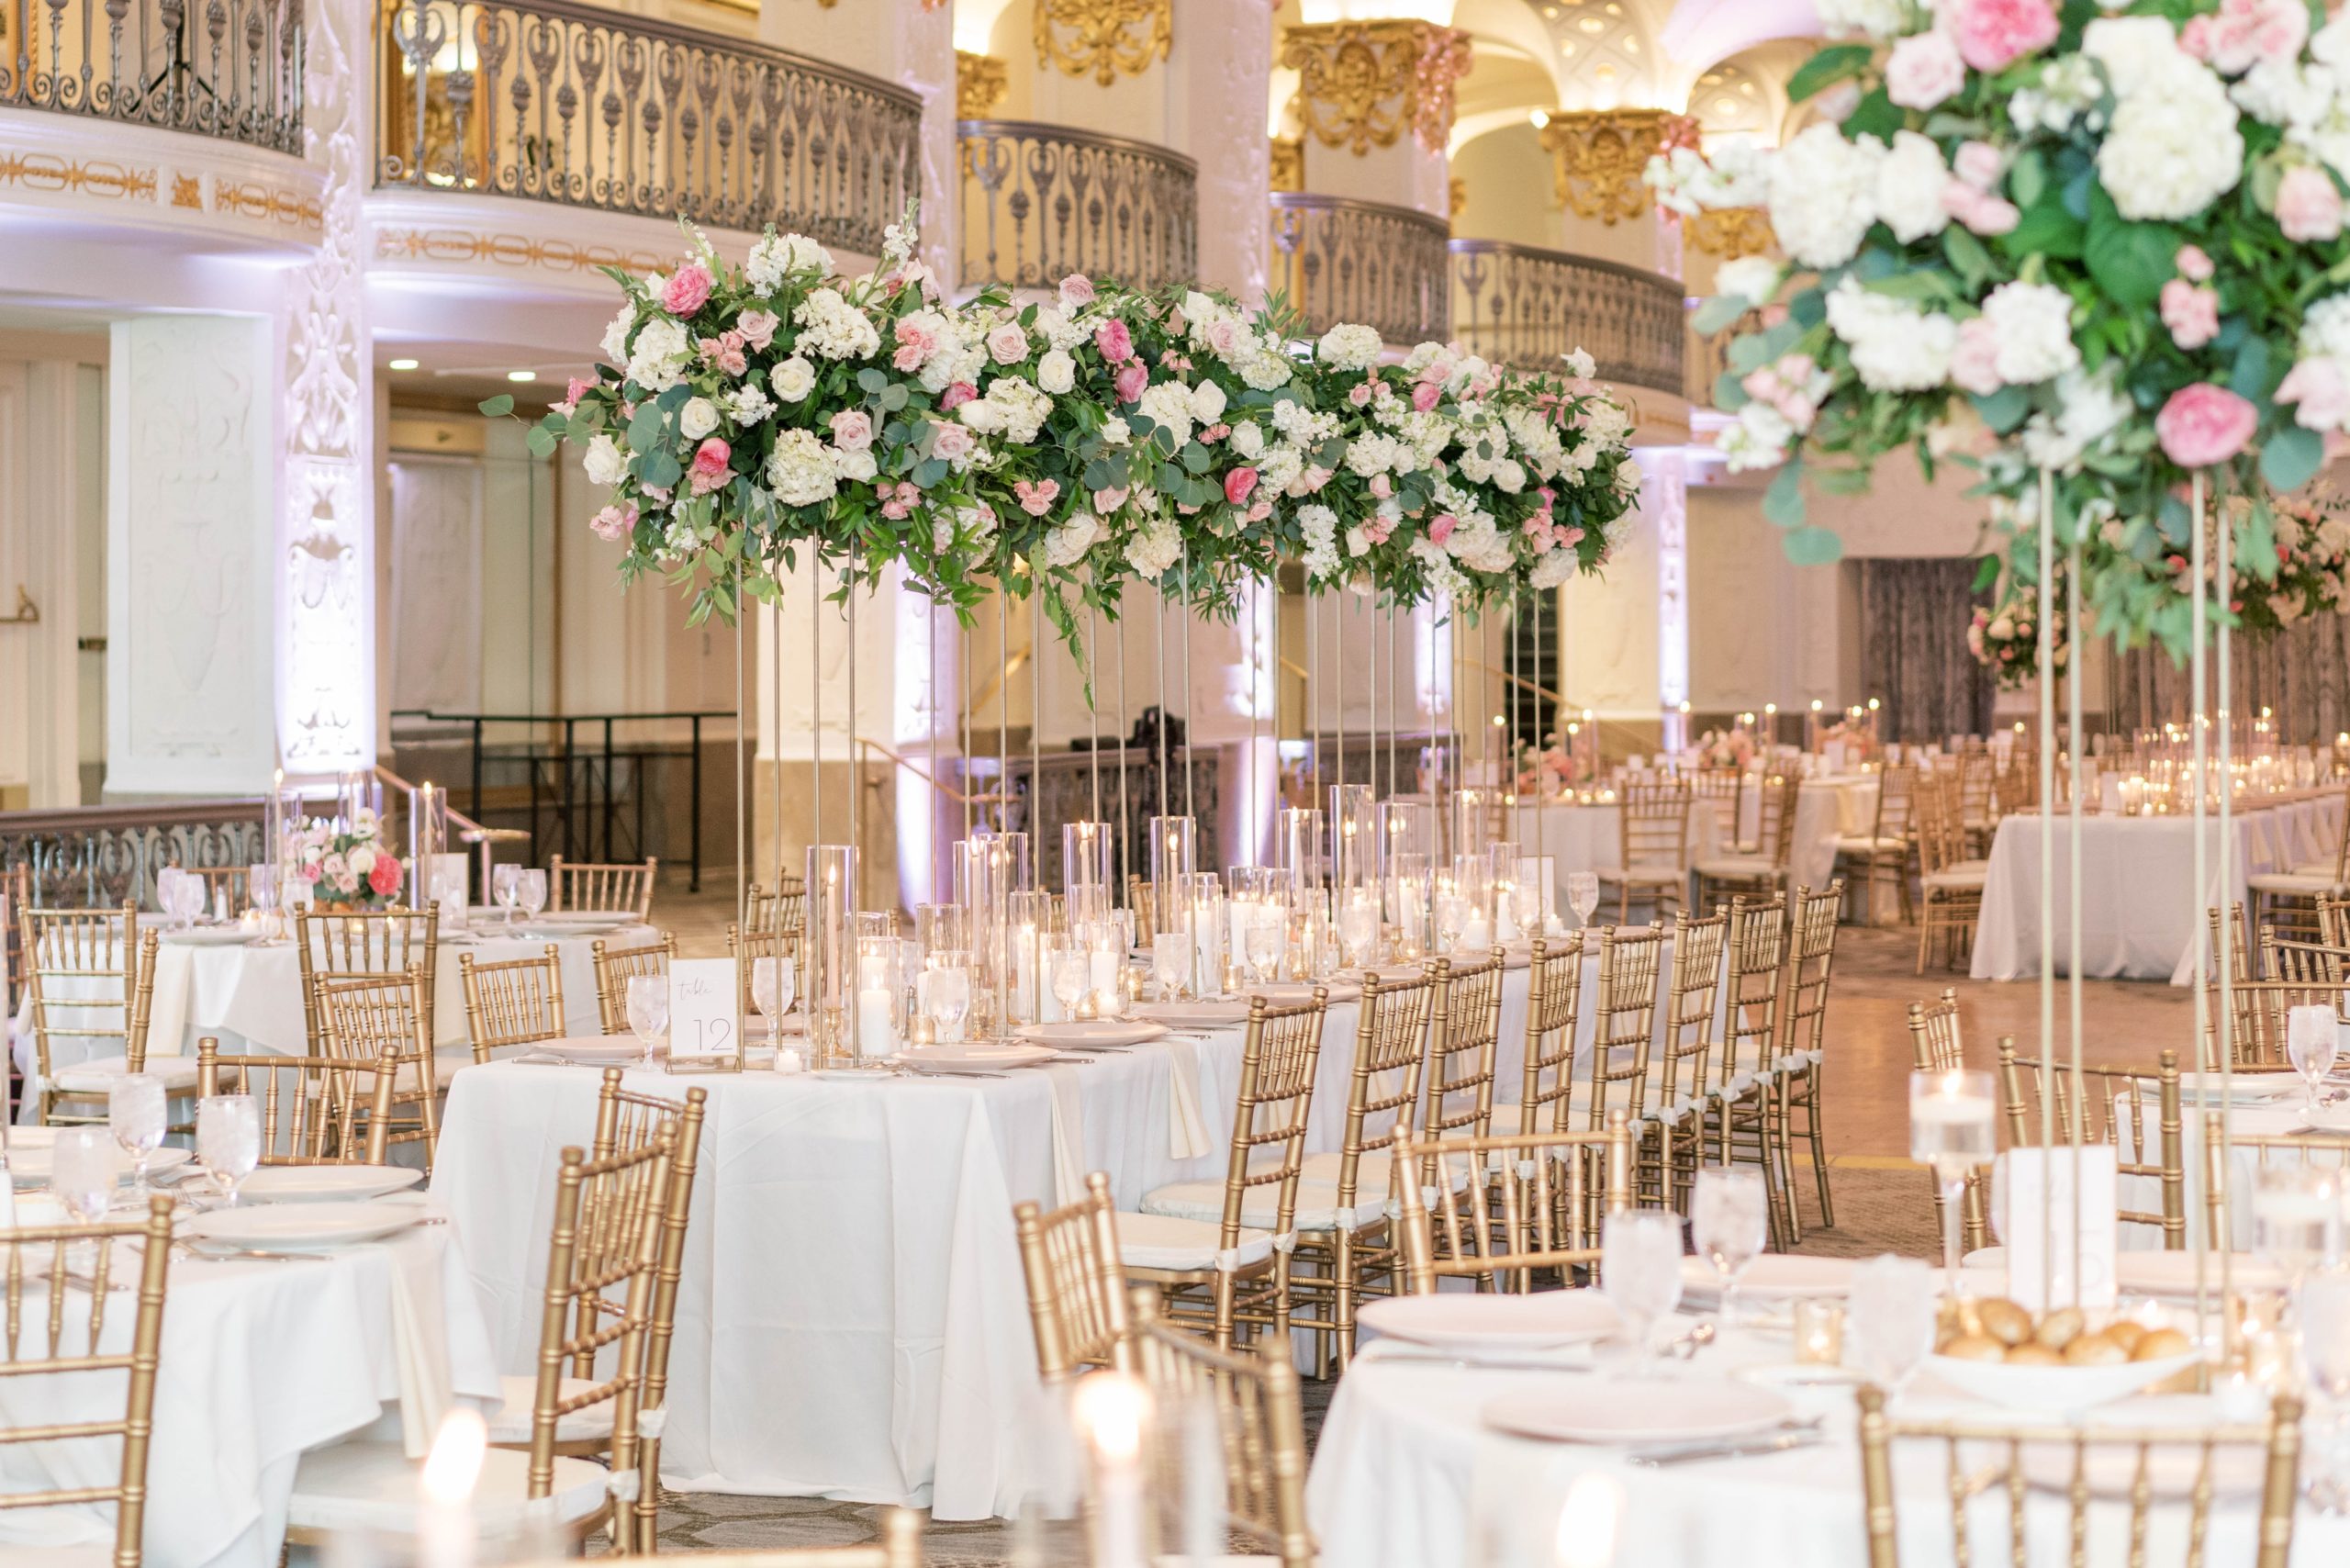 A stunning summer wedding at the Mayflower Hotel in Washington, DC with portraits at the iconic Lincoln Memorial.